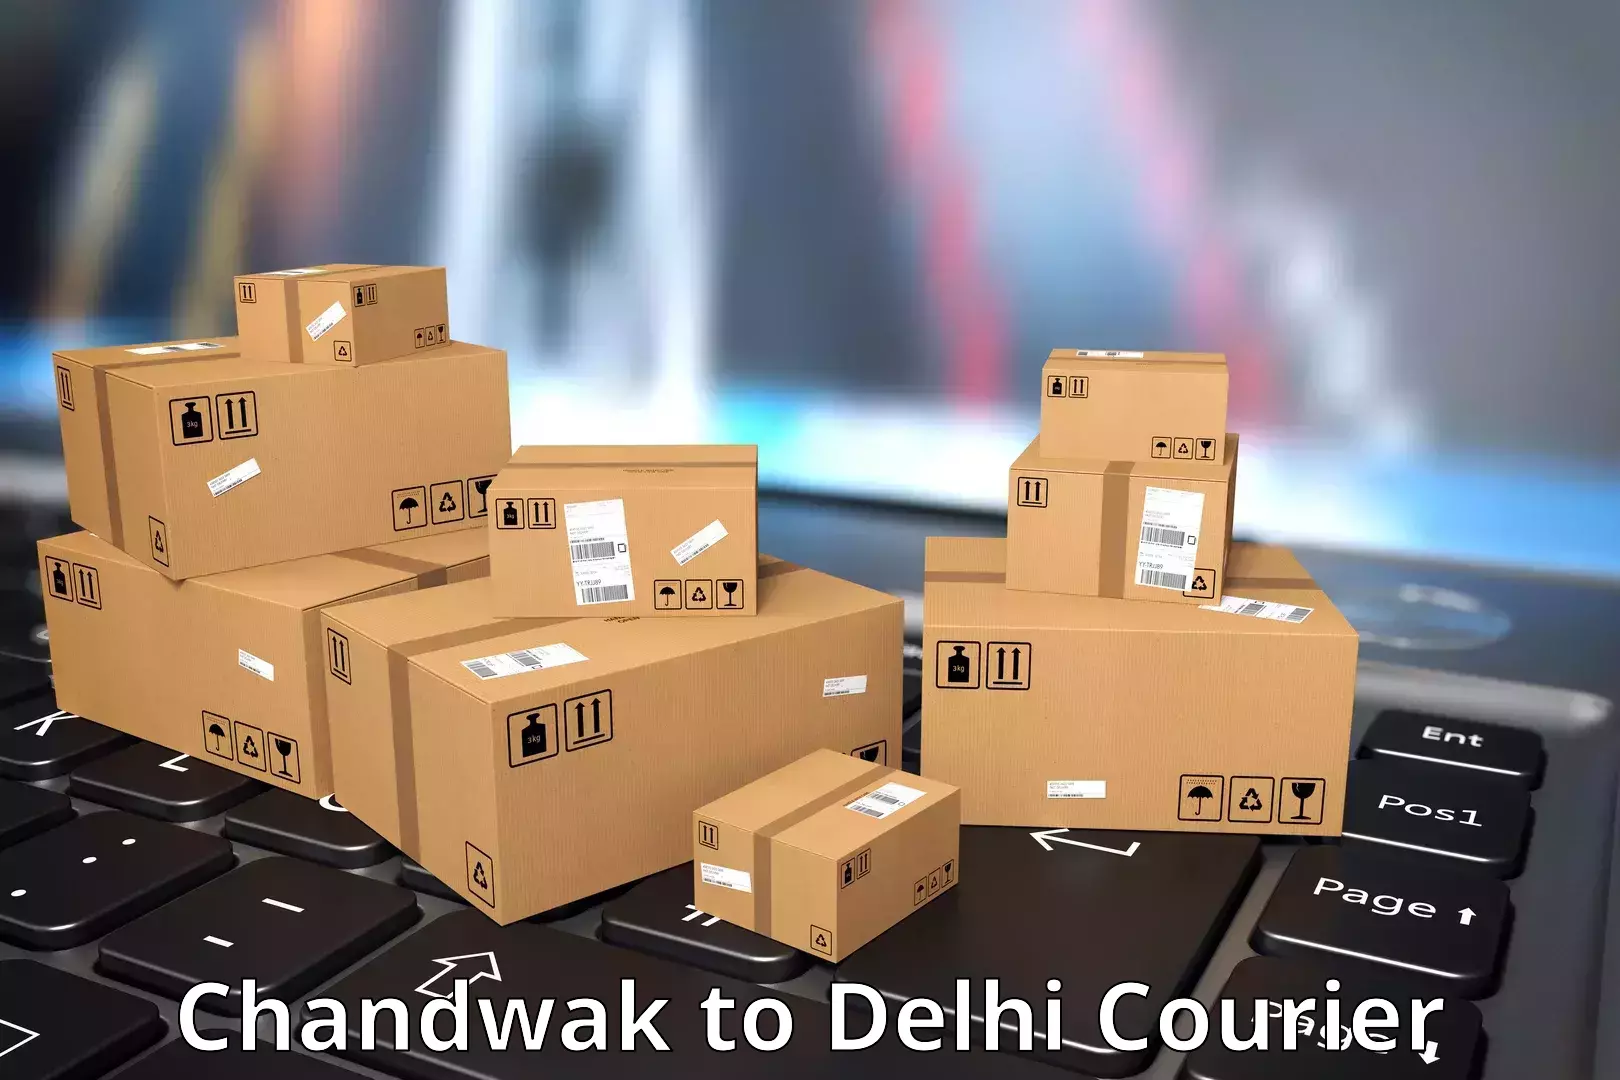 Parcel service for businesses Chandwak to NCR